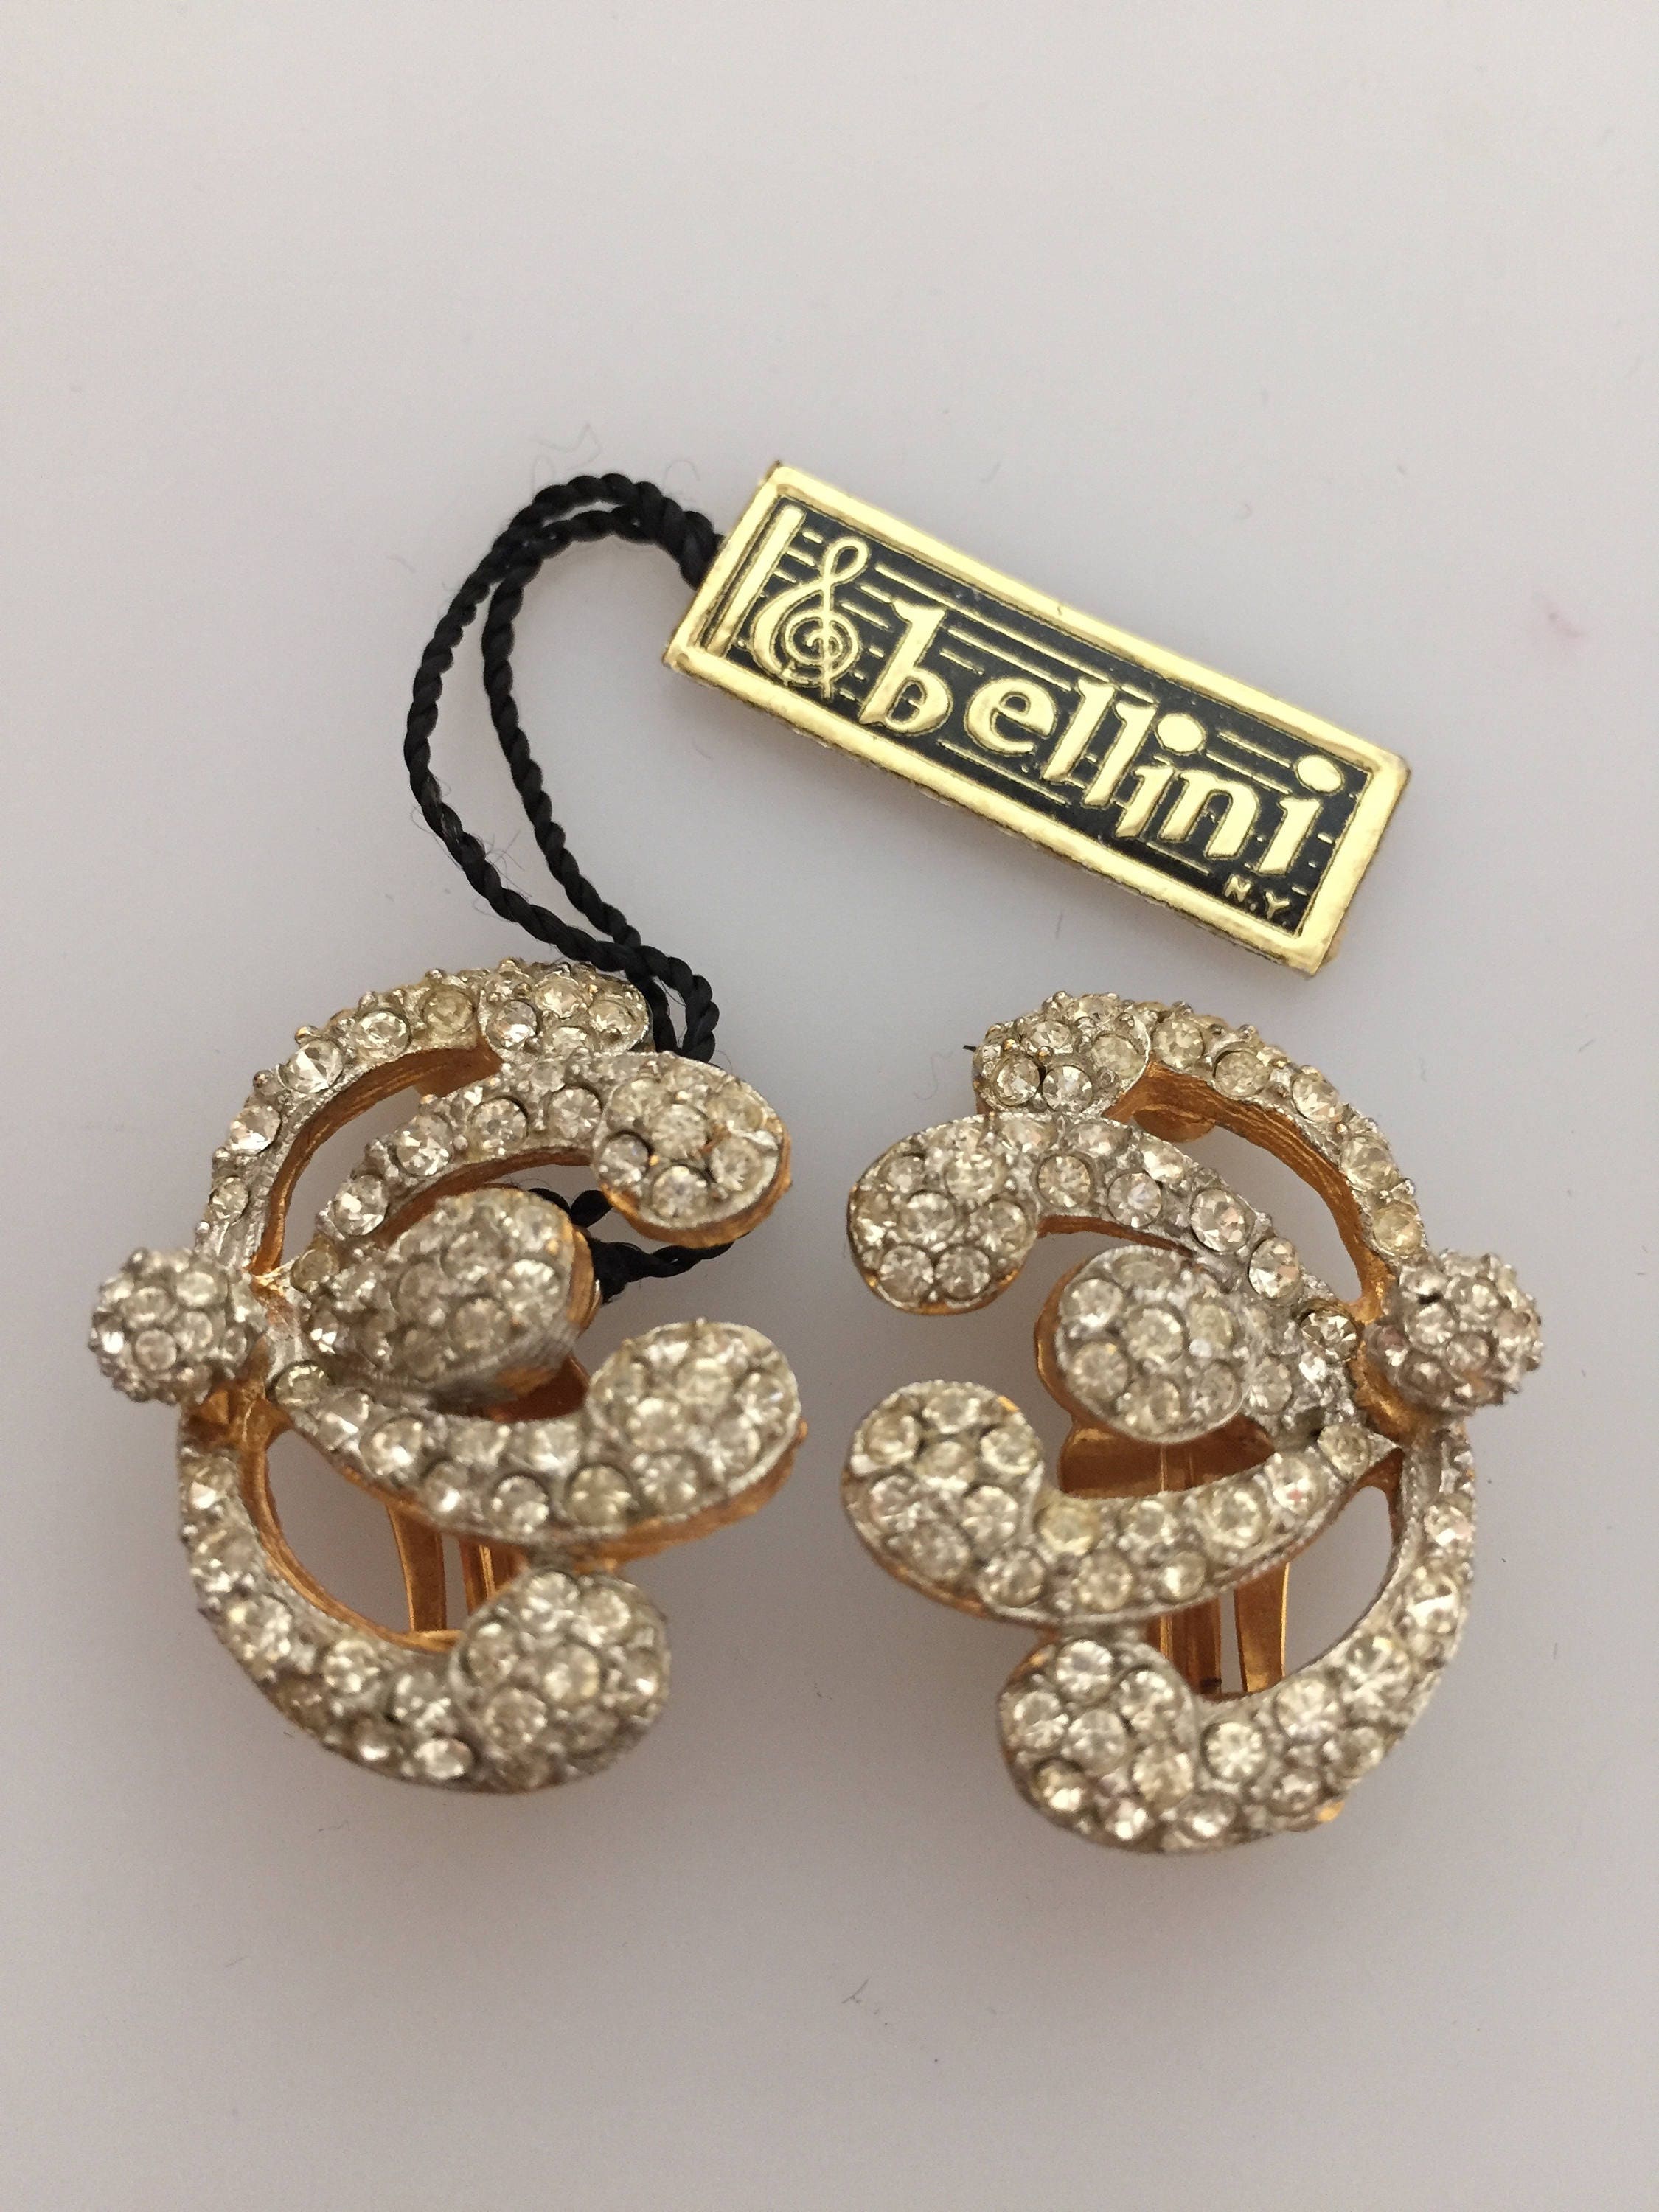 Gorgeous 1950s Vintage RHINESTONE Earrings Signed BELLINI With 